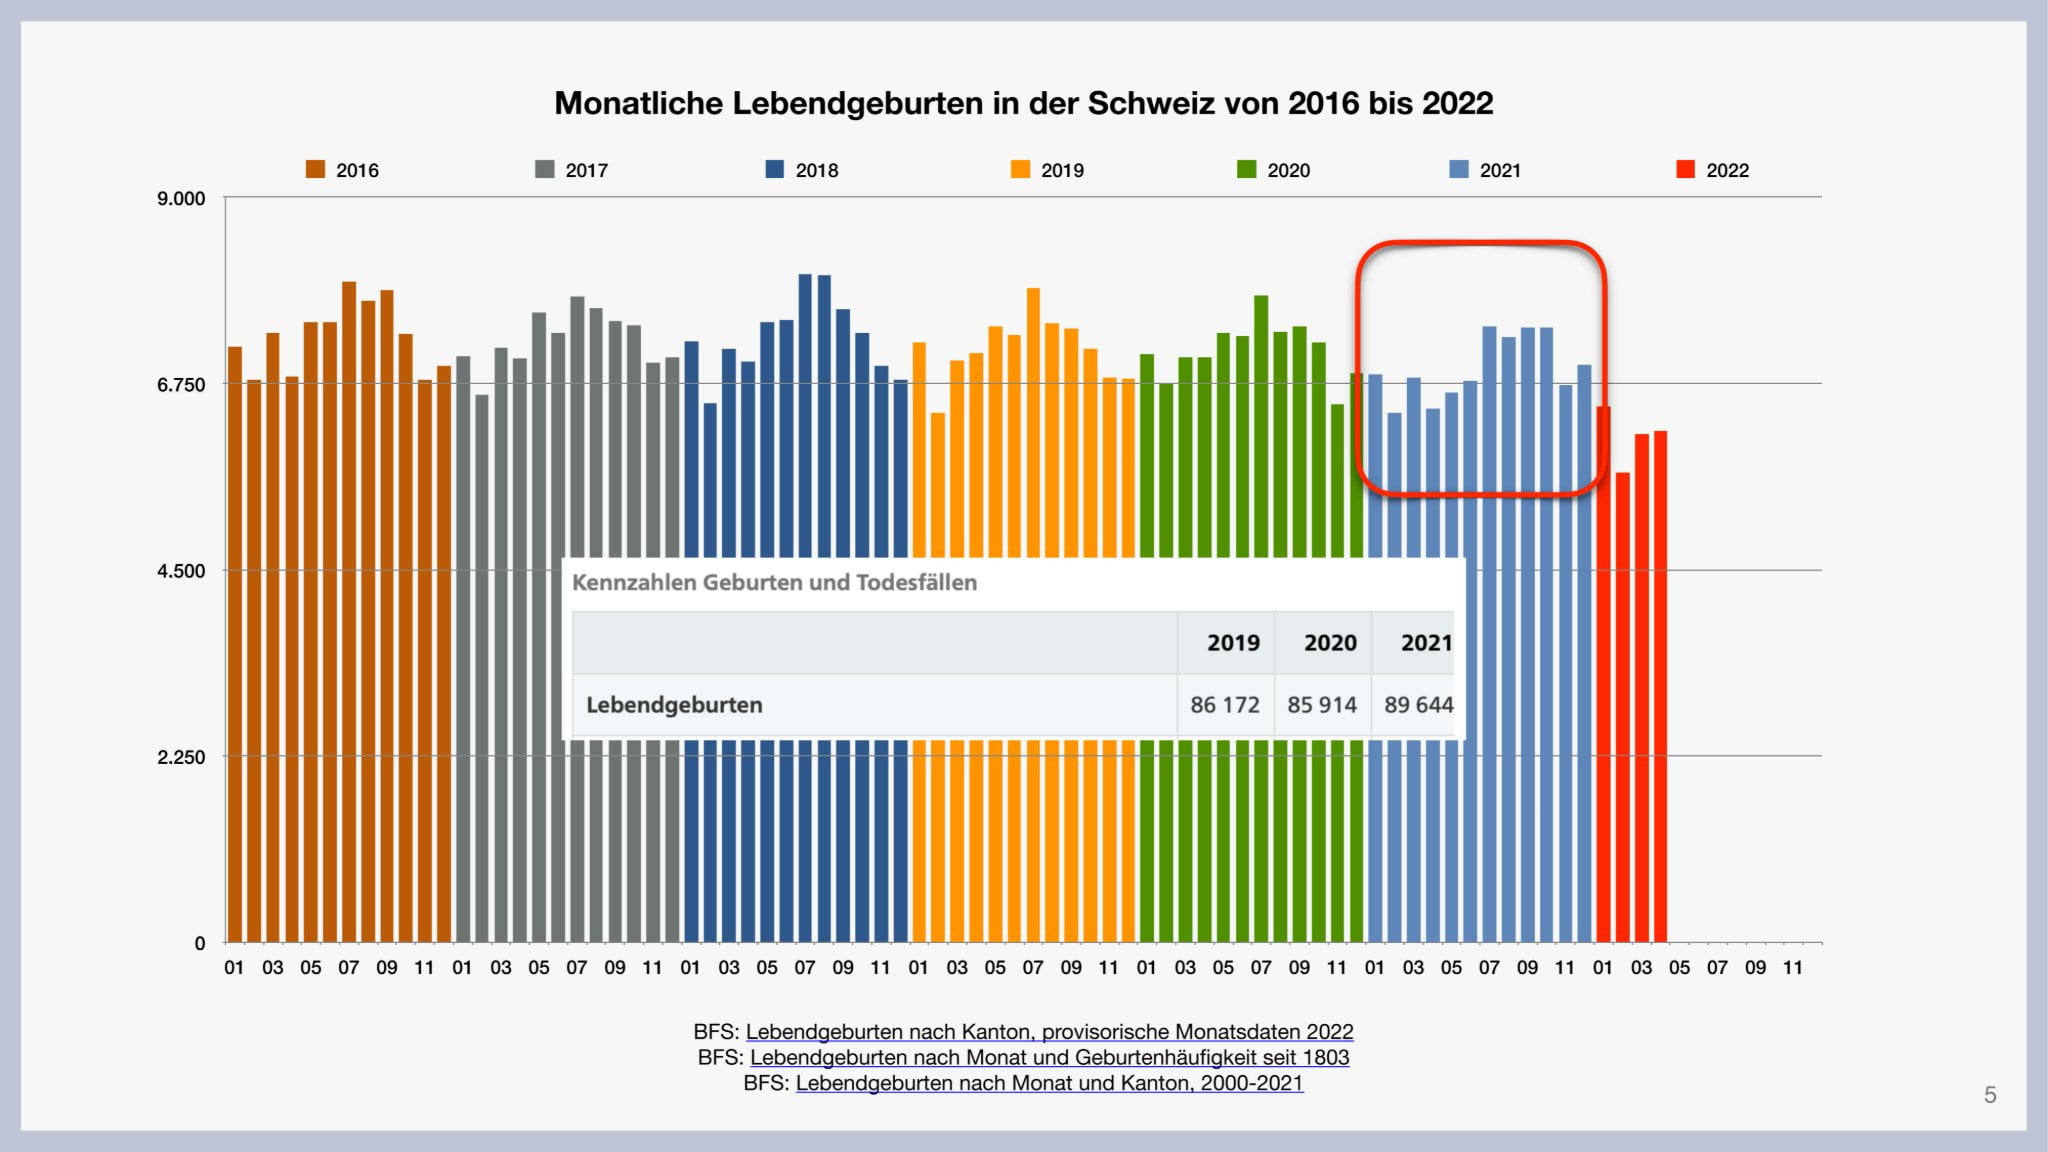 Birth rate developments in Switzerland and Germany in 2022...